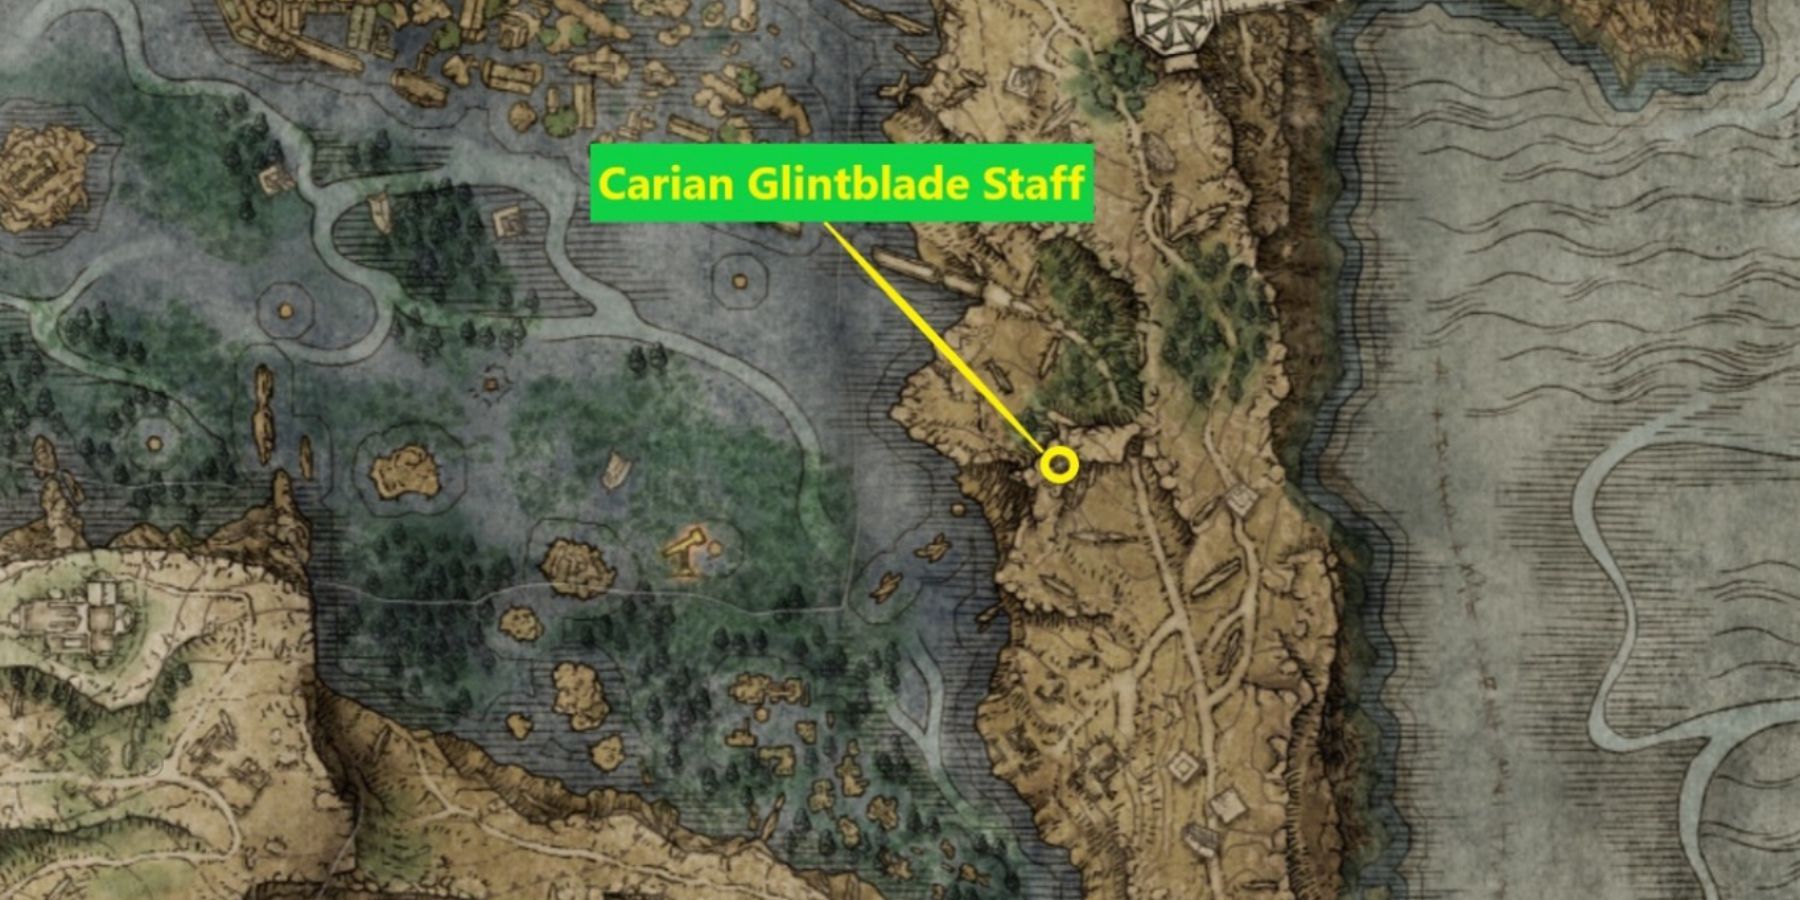 Carian Glintblade Staff location on the map in Elden Ring